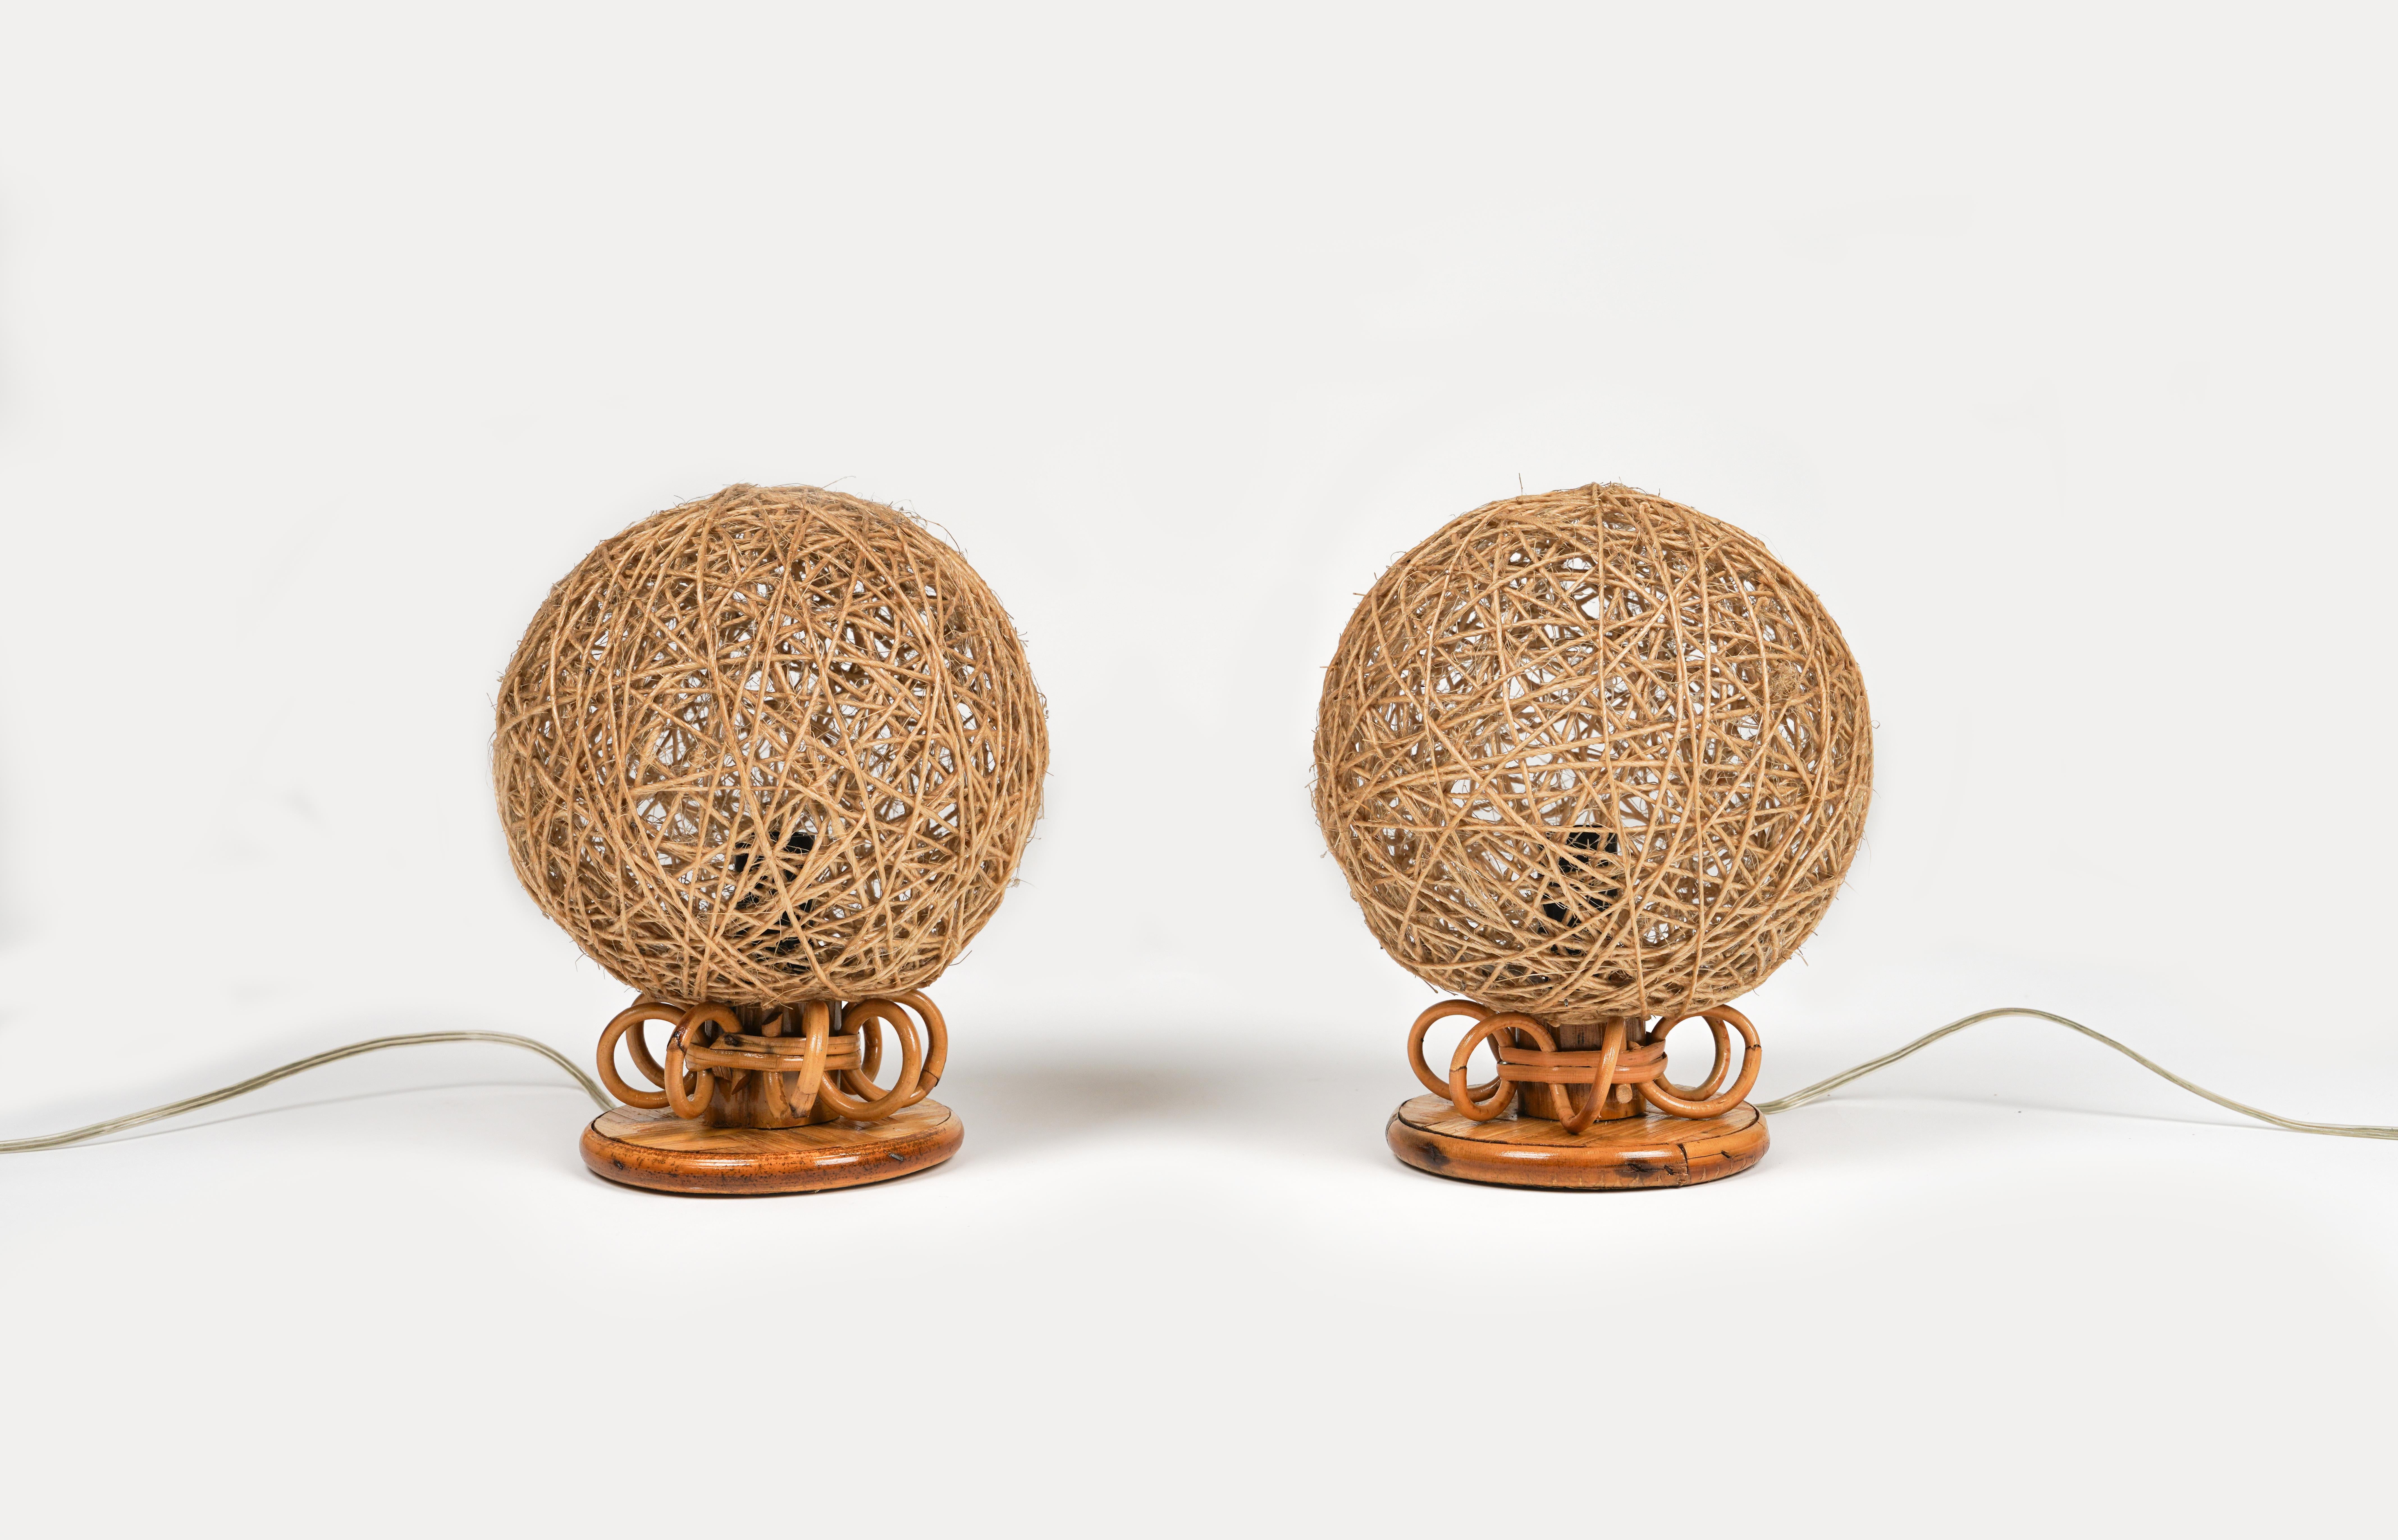 Beautiful pair of round table lamps in rattan and rope.

Made in Italy in the 1970s.

Bamboo / rattan has been polished by a professional restorer.